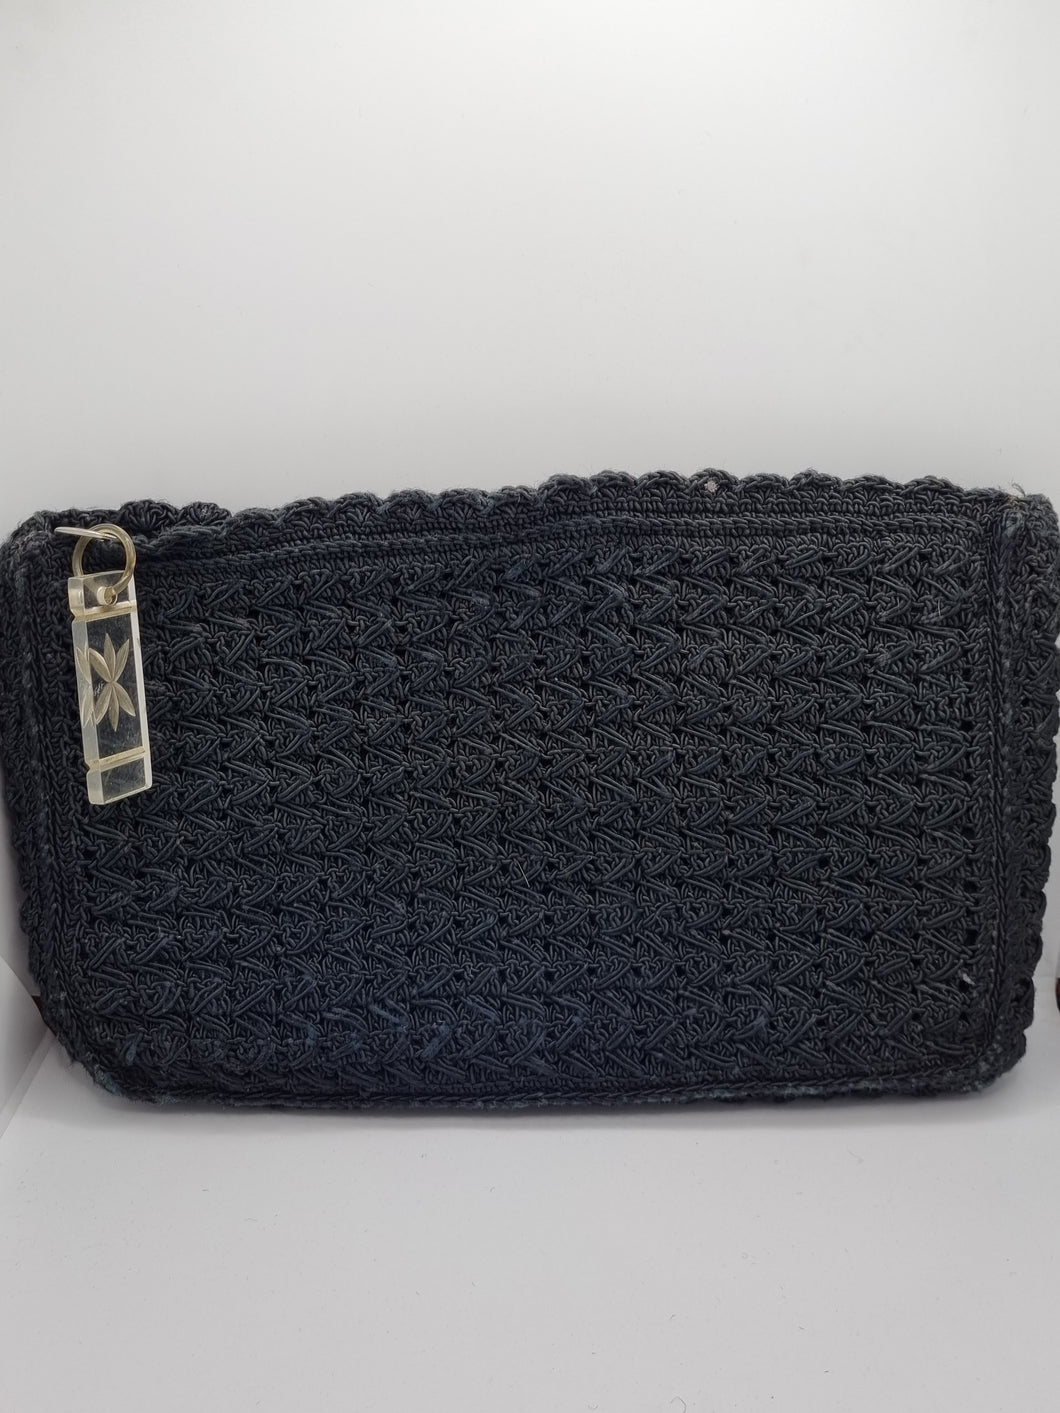 1940s HUGE Black Crochet Clutch Bag With Lucite Pull